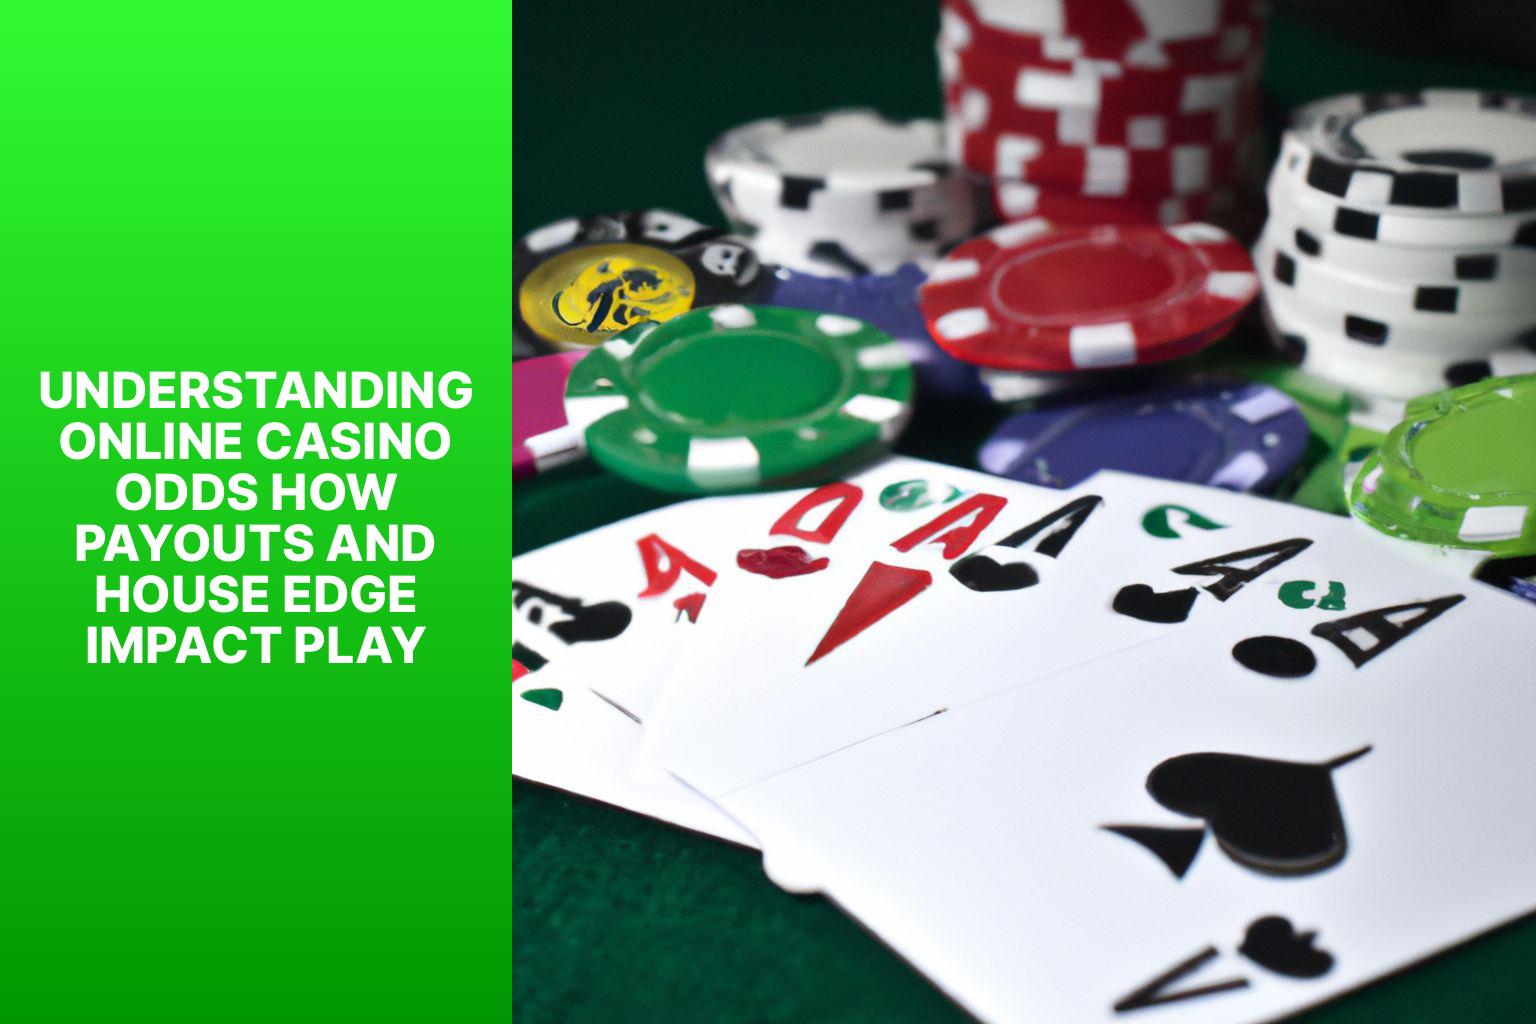 Understanding Online Casino Odds How Payouts and House Edge Impact Play